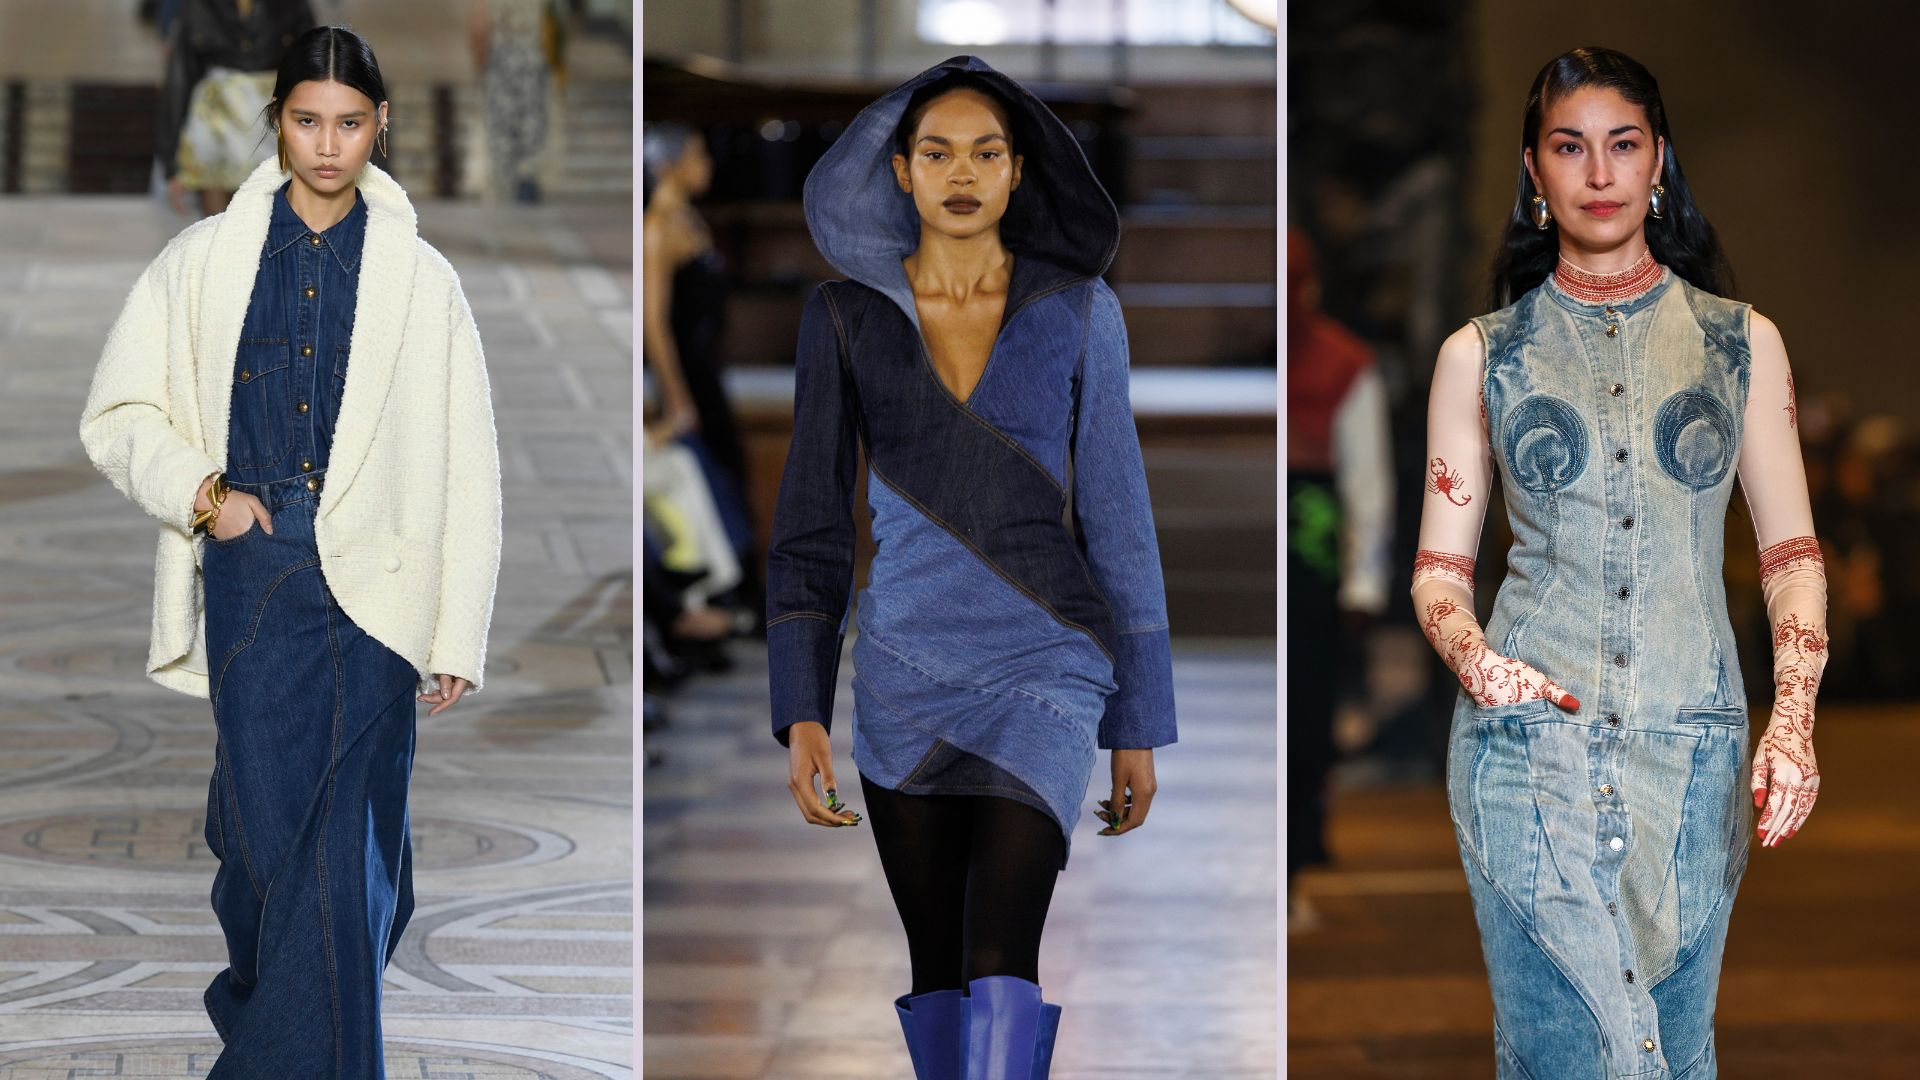 Inside-out jeans might be the most bizarre fashion trend yet